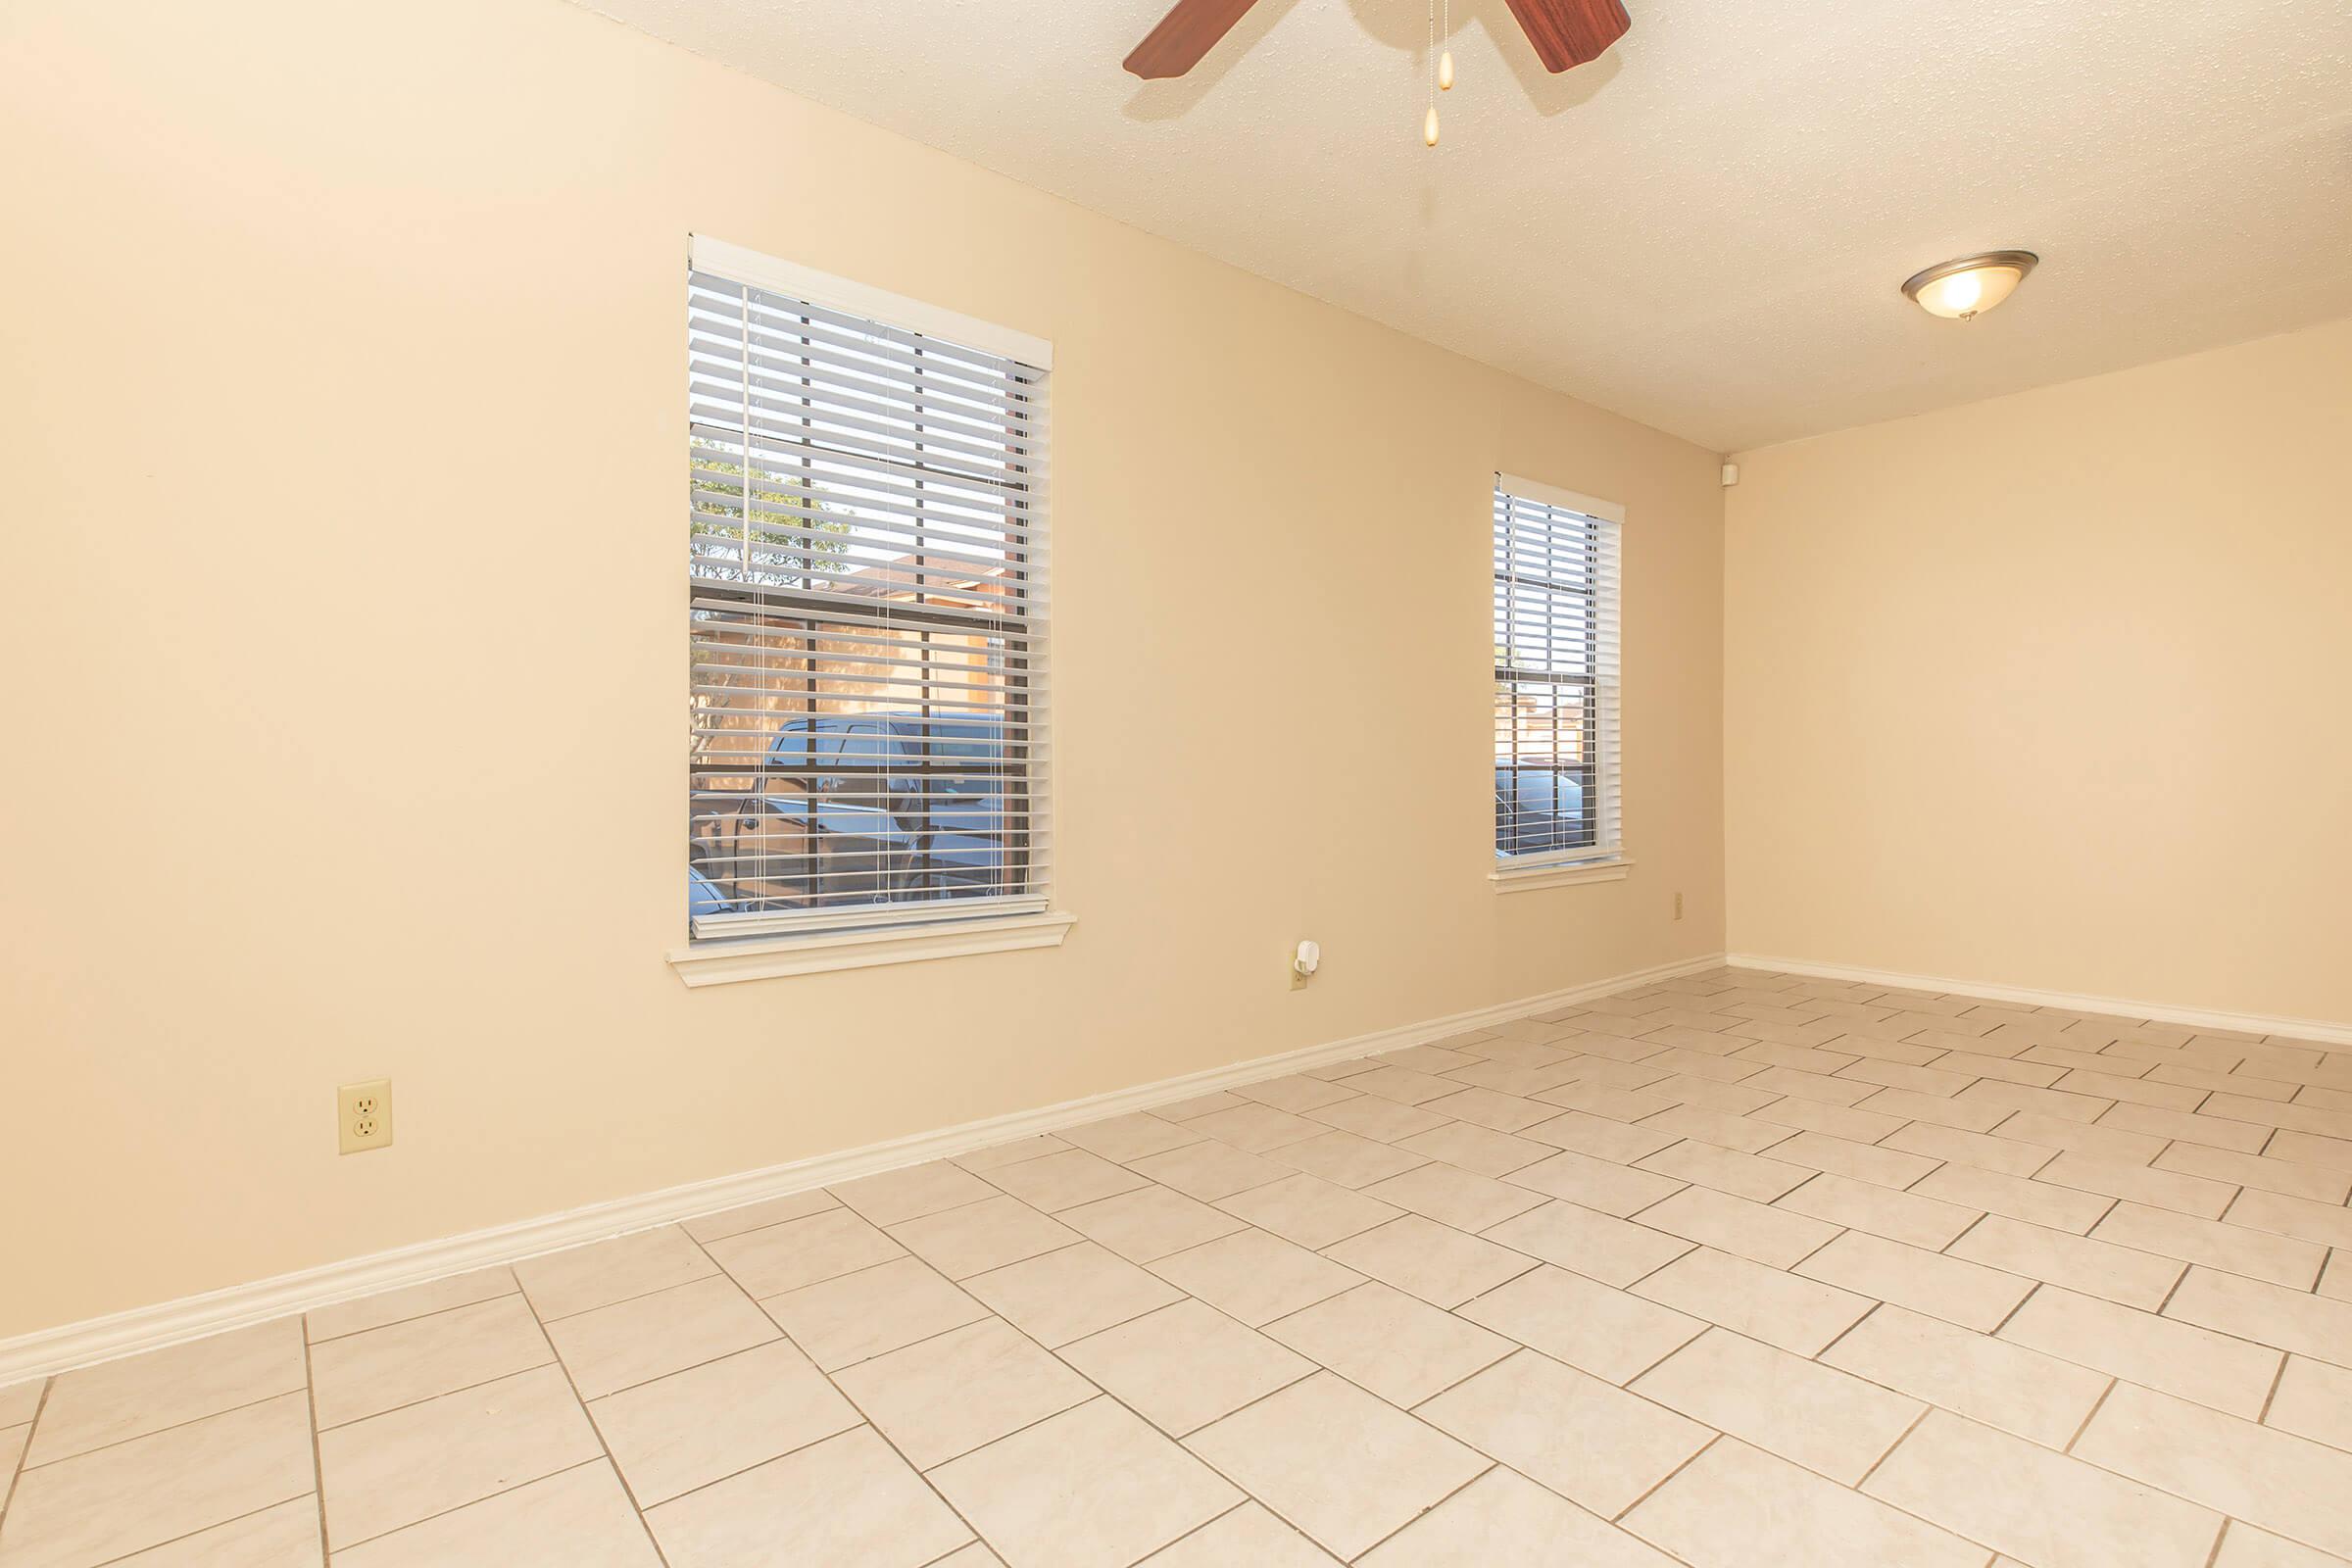 TILE FLOORS AND VAULTED CEILINGS IN TWO BEDROOM APARTMENT FOR RENT.